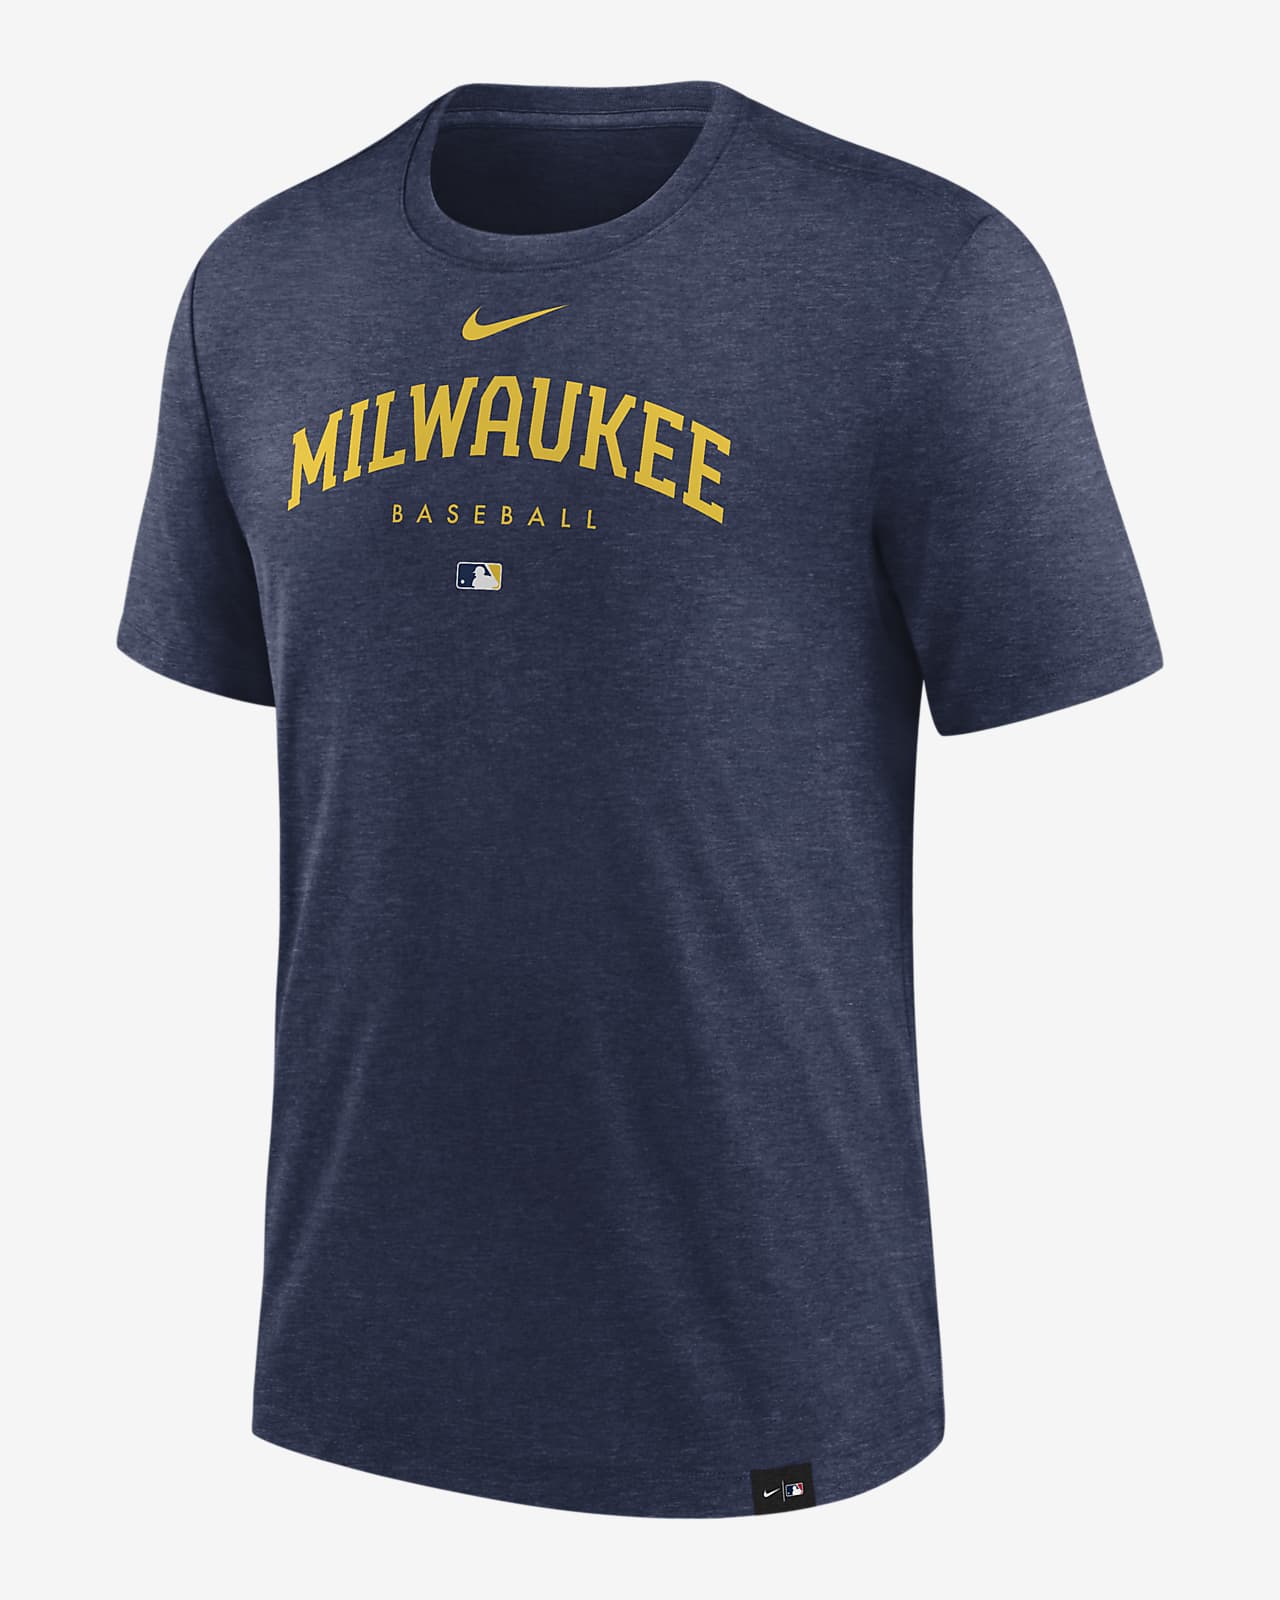 Nike Men's Milwaukee Brewers Early Work T-Shirt - Navy - S - S (Small)